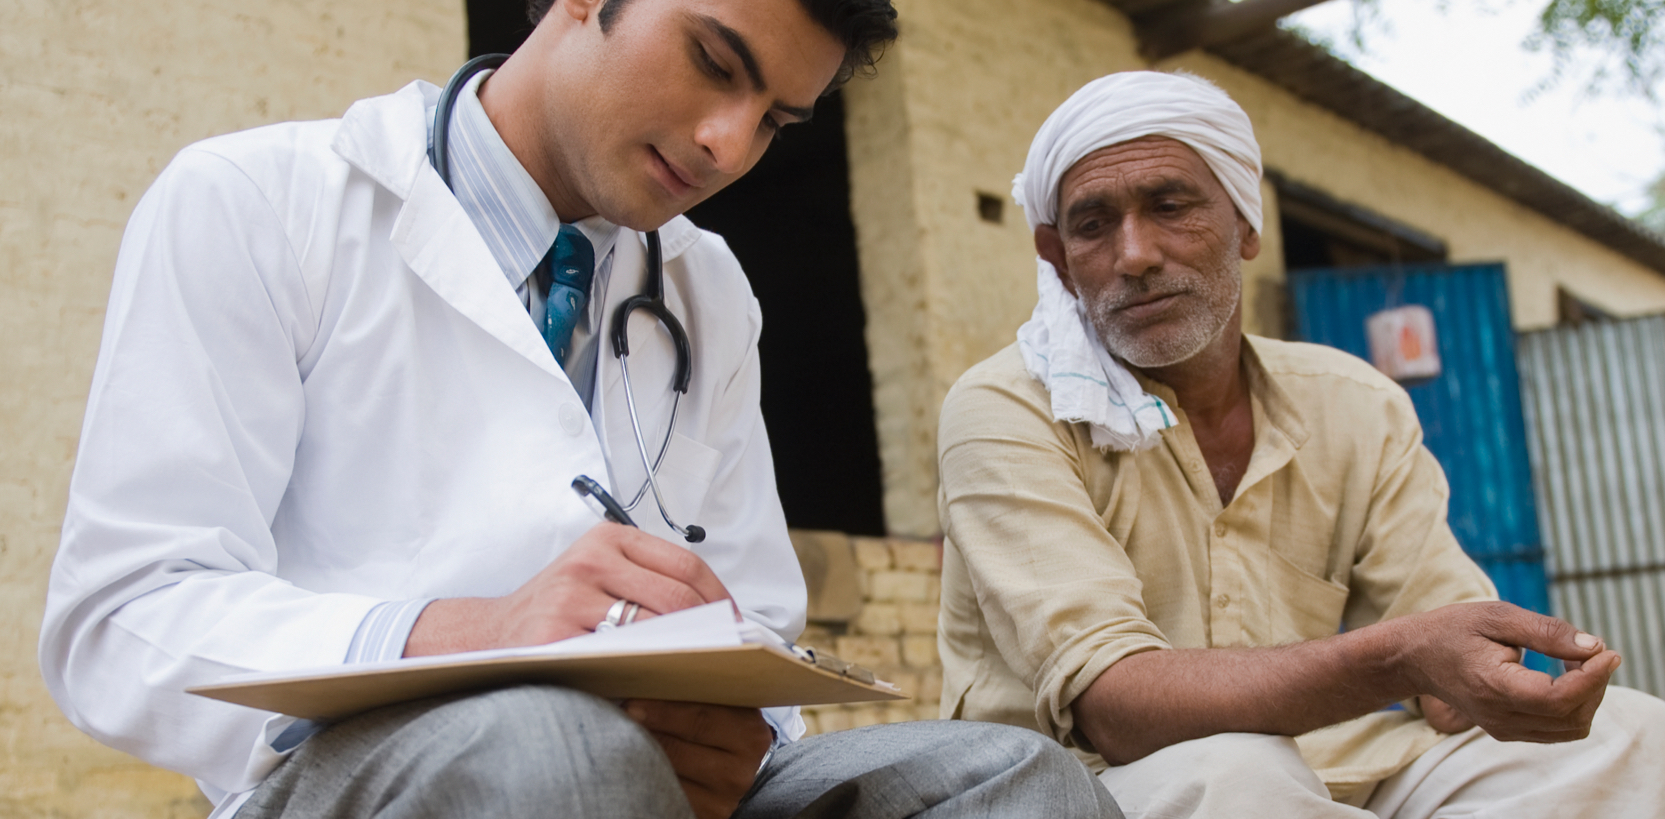 A doctor consulting with patient and writing down notes outside on a curb